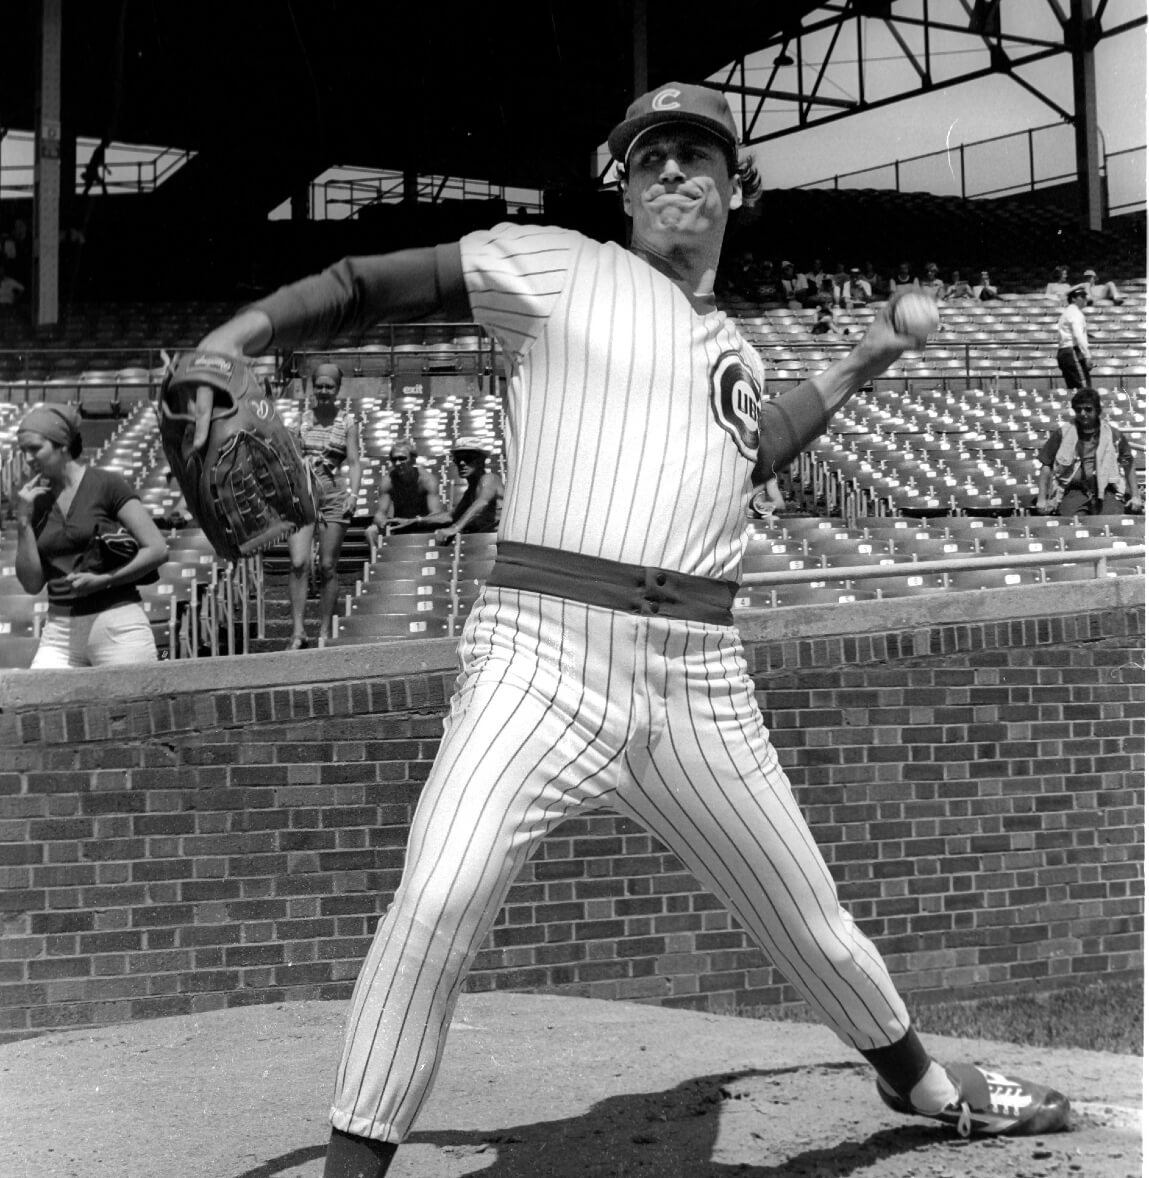 Ken Holtzman played for the Chicago Cubs from 1965-71 & 1978-79